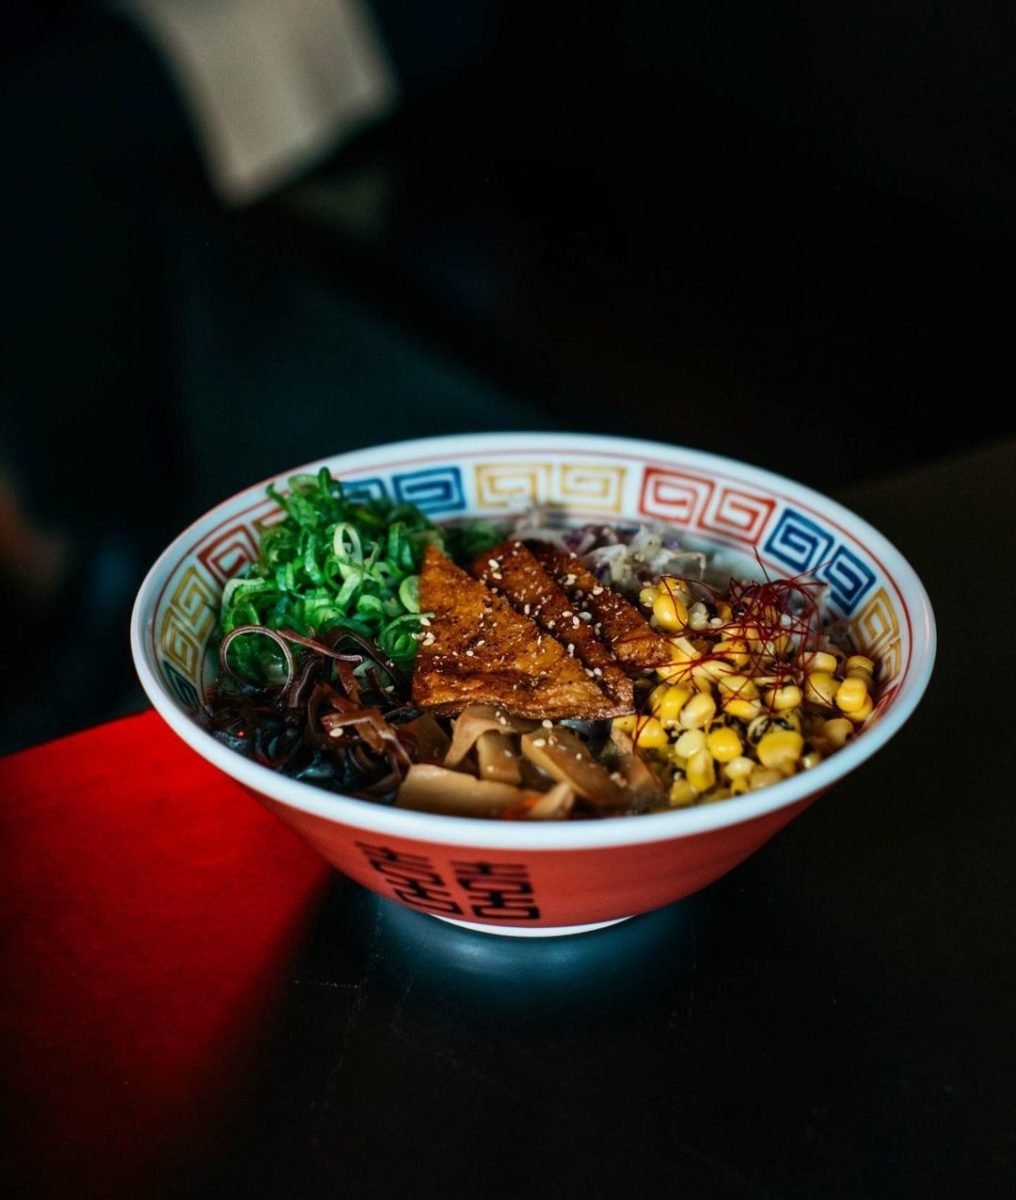 Lonely Mouth is doing up plant-based ramen and have quickly developed a cult following.